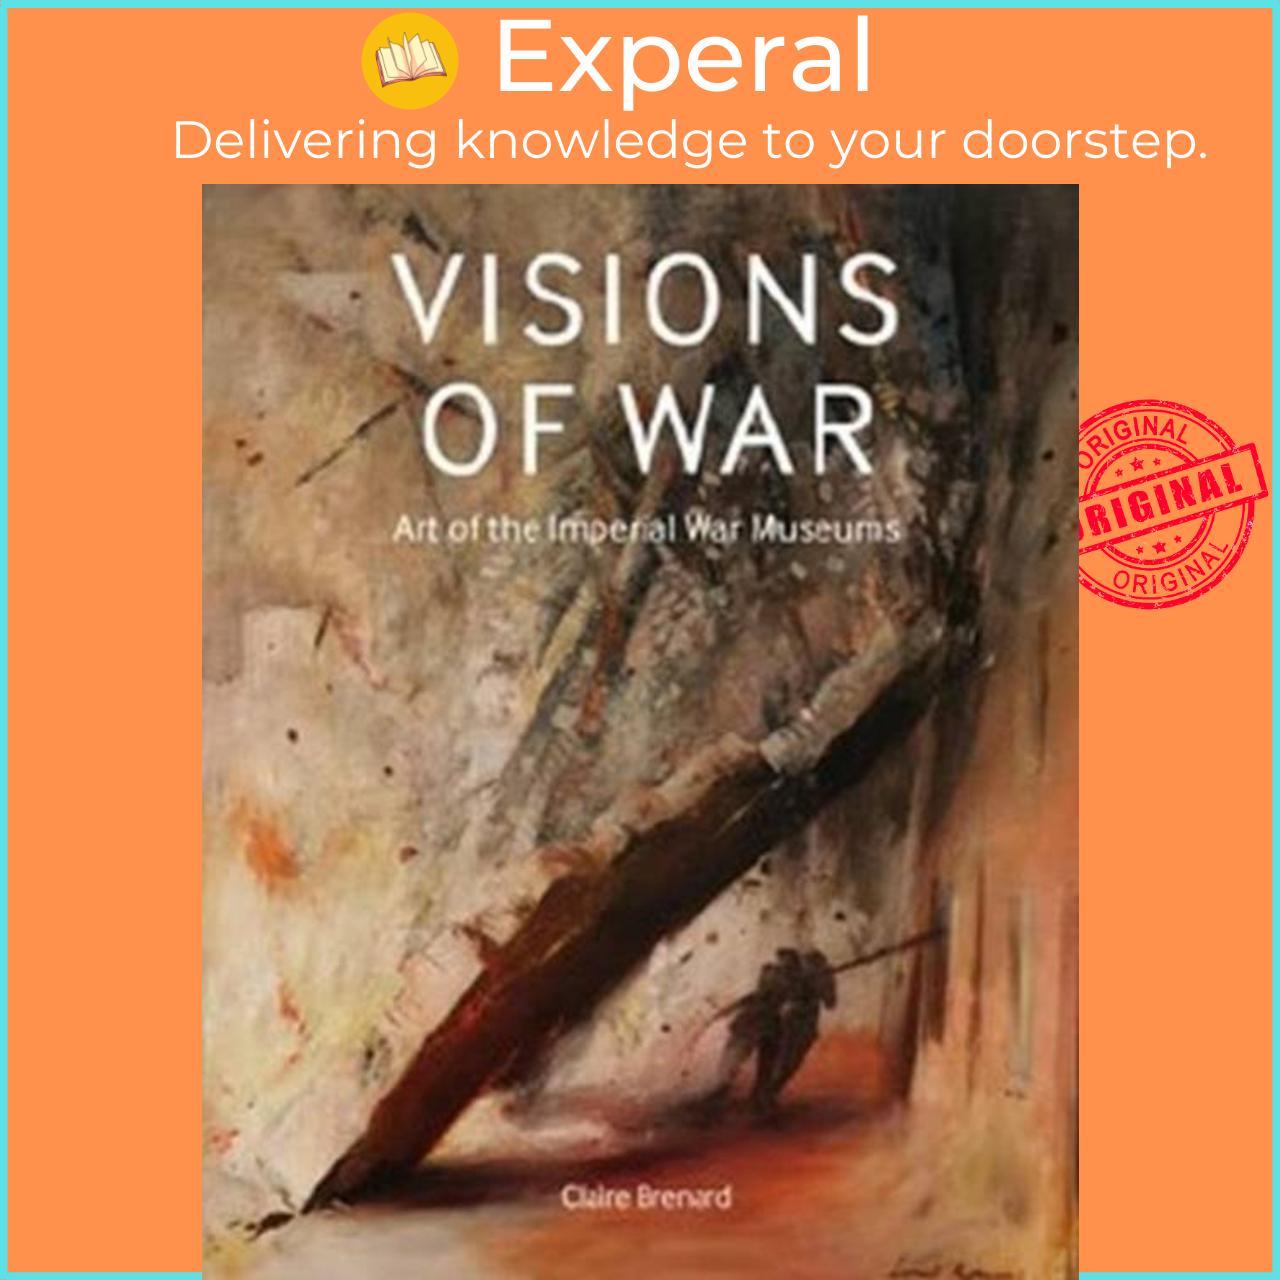 Sách - Visions of War - Art of the Imperial War Museums by Claire Brenard (UK edition, hardcover)